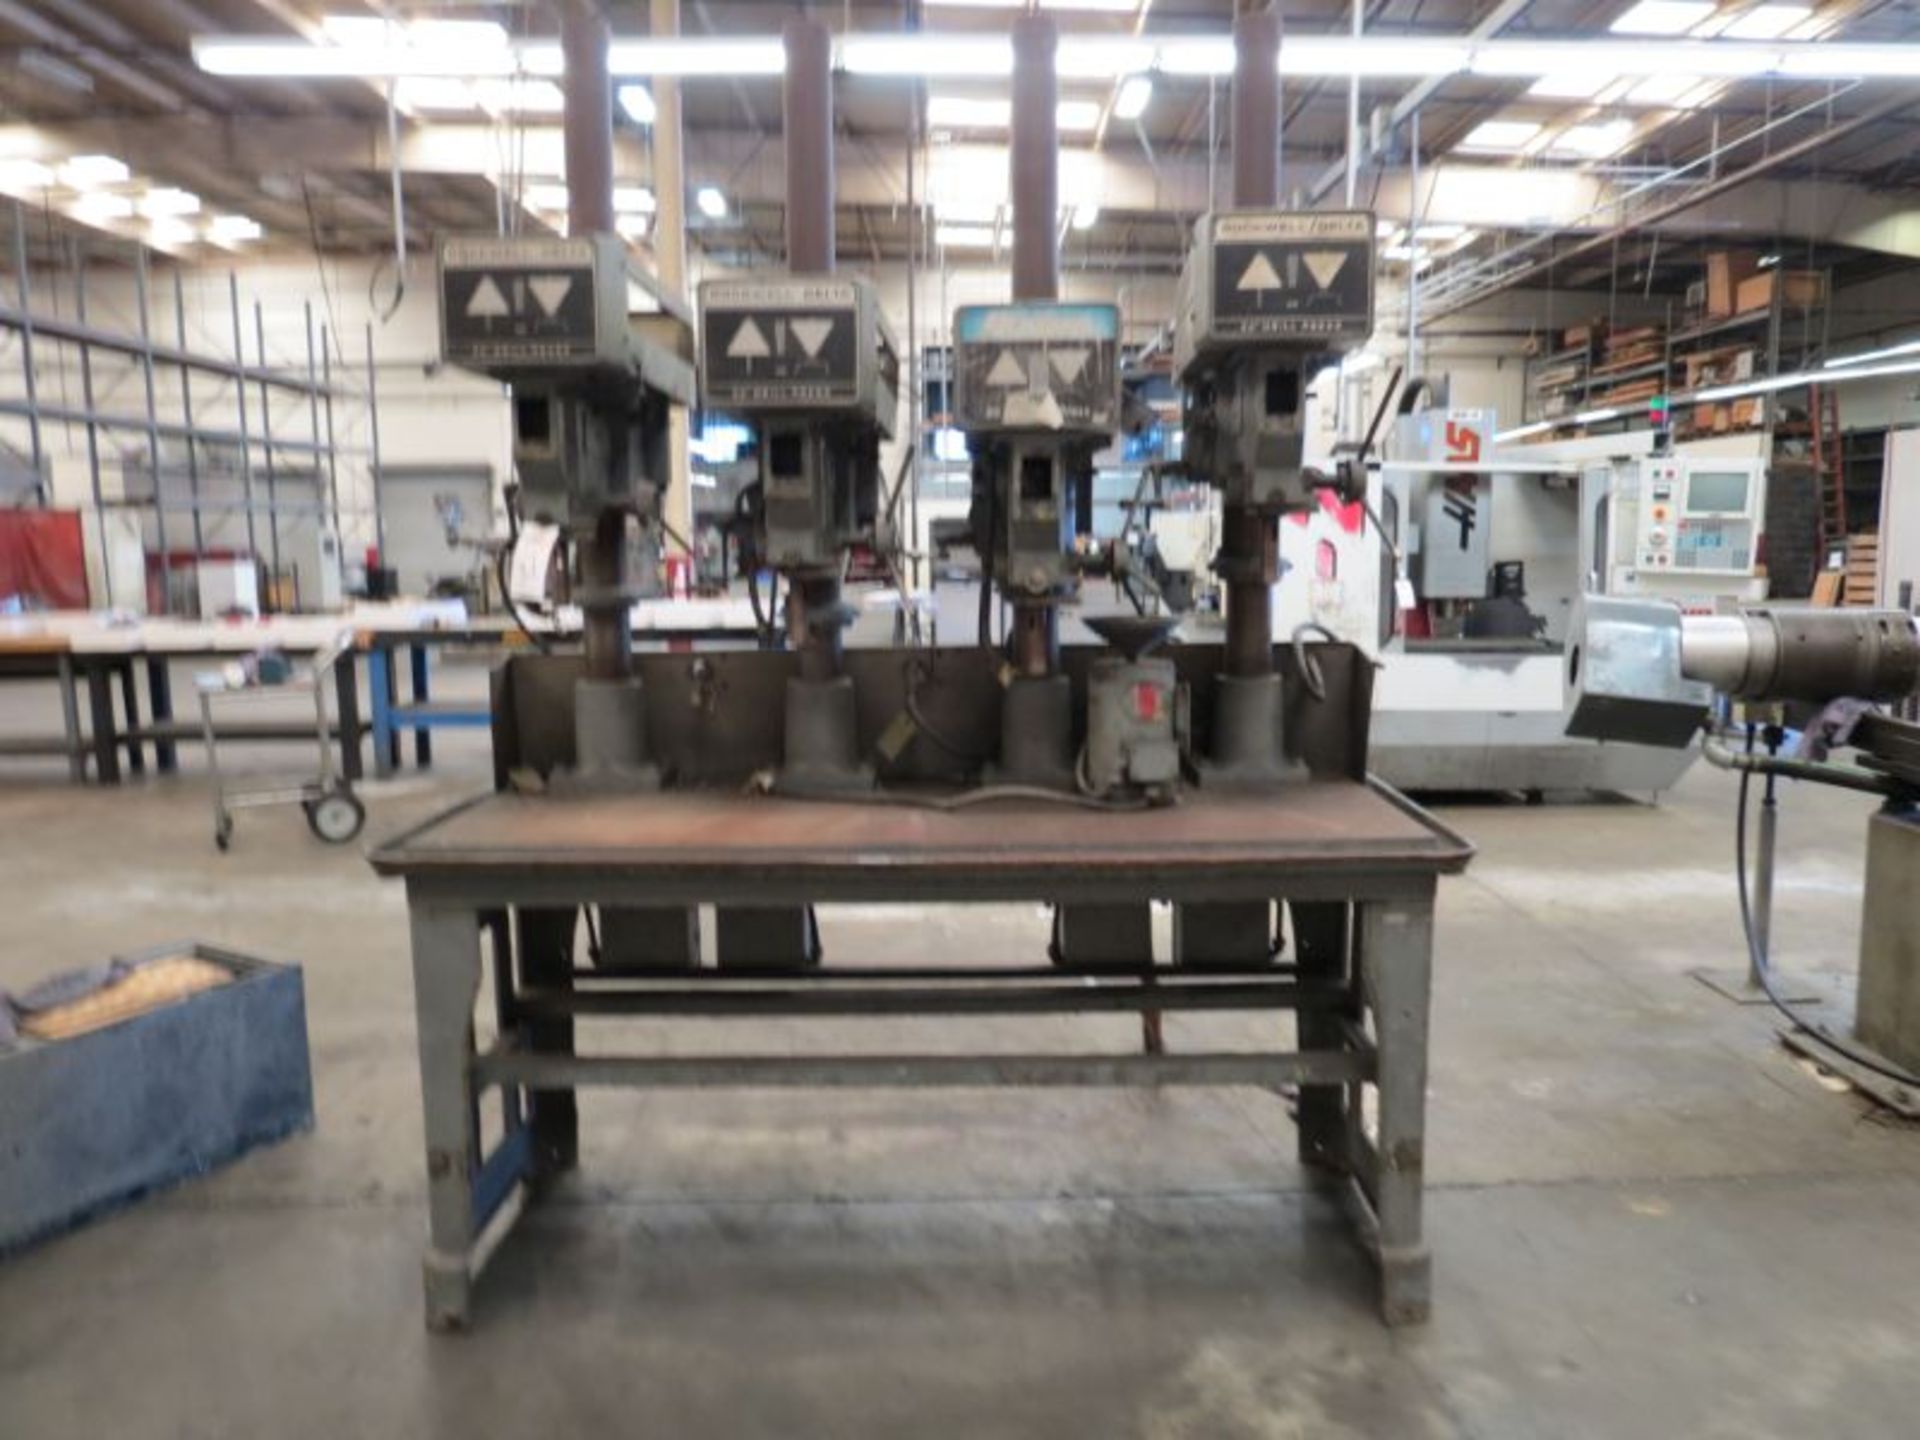 Rockwell Delta 20" 4 Spindle Drill Presses, 70” x 24” table, 2 HP spindles, s/n 1740176 - Image 3 of 4